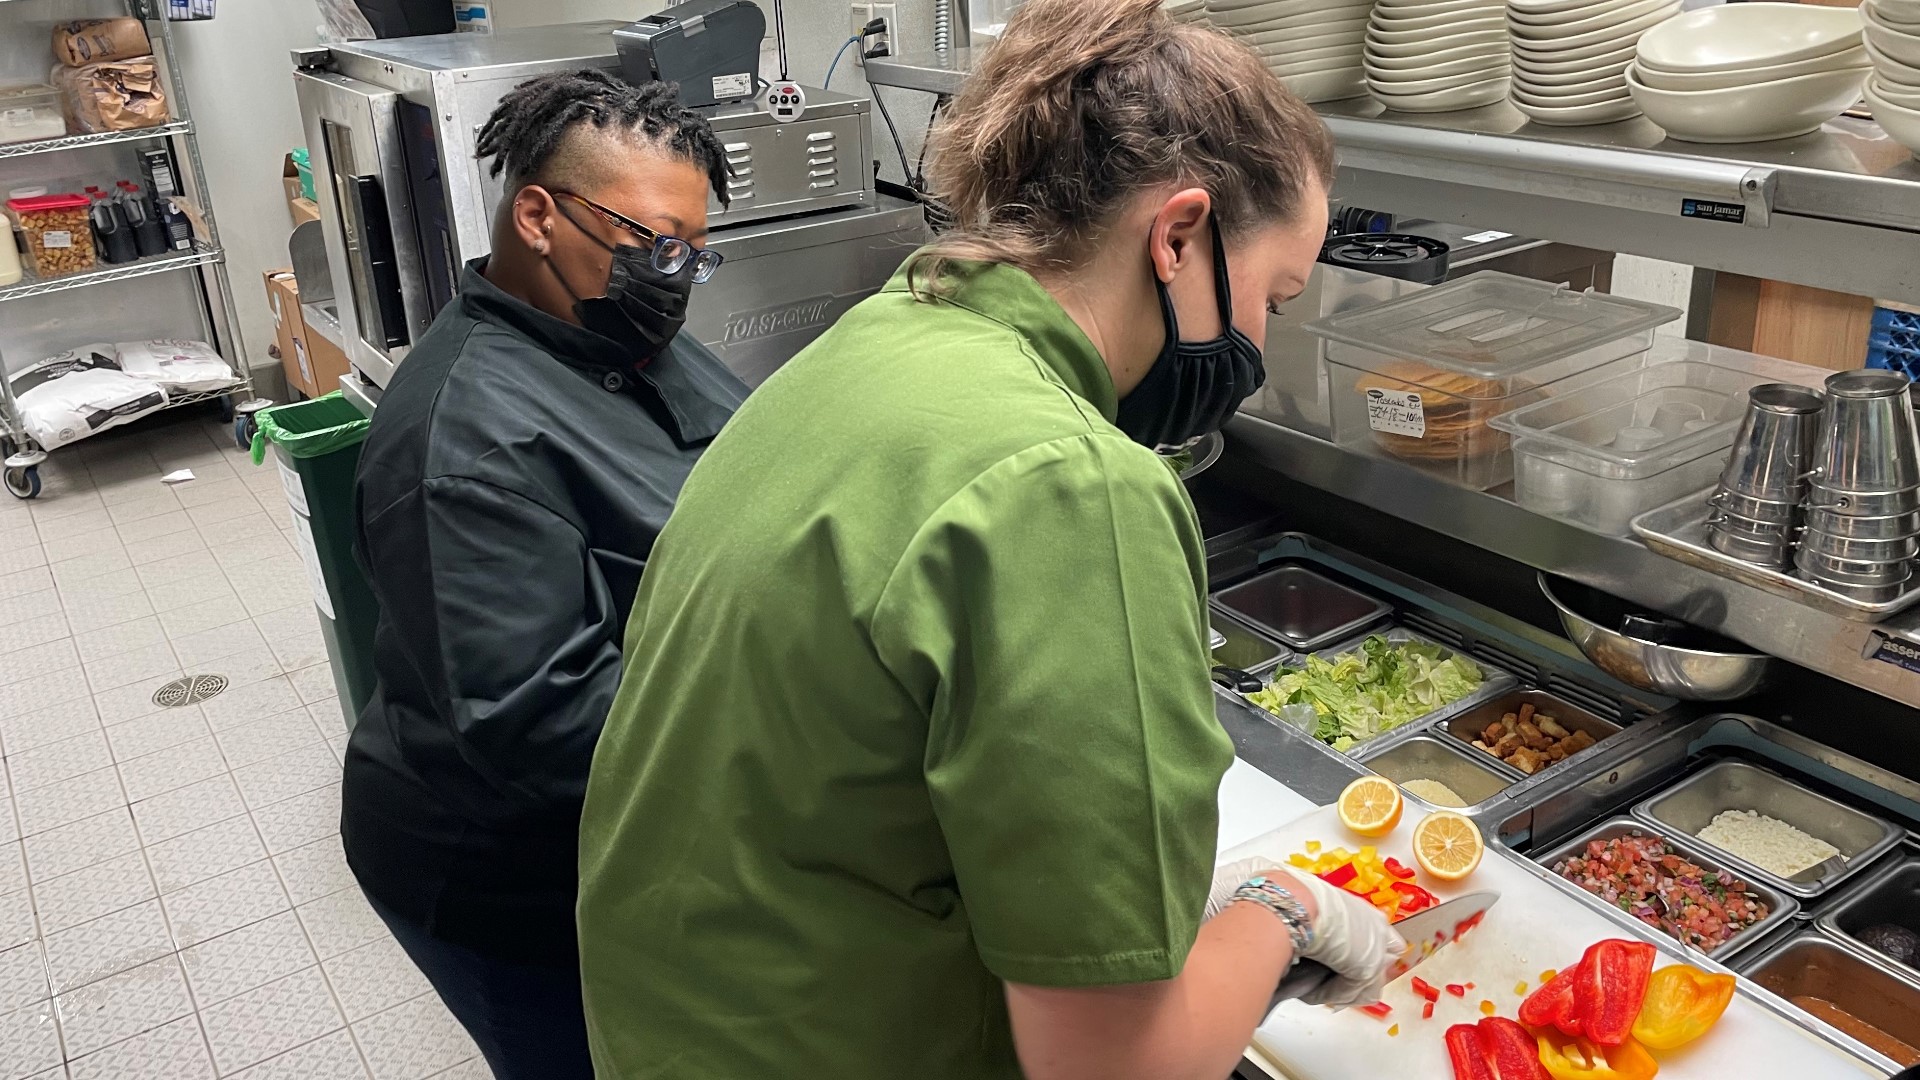 After discovering about a quarter of the waste generated in DFW’s terminals is food, workers at airport restaurants are being trained to compost.